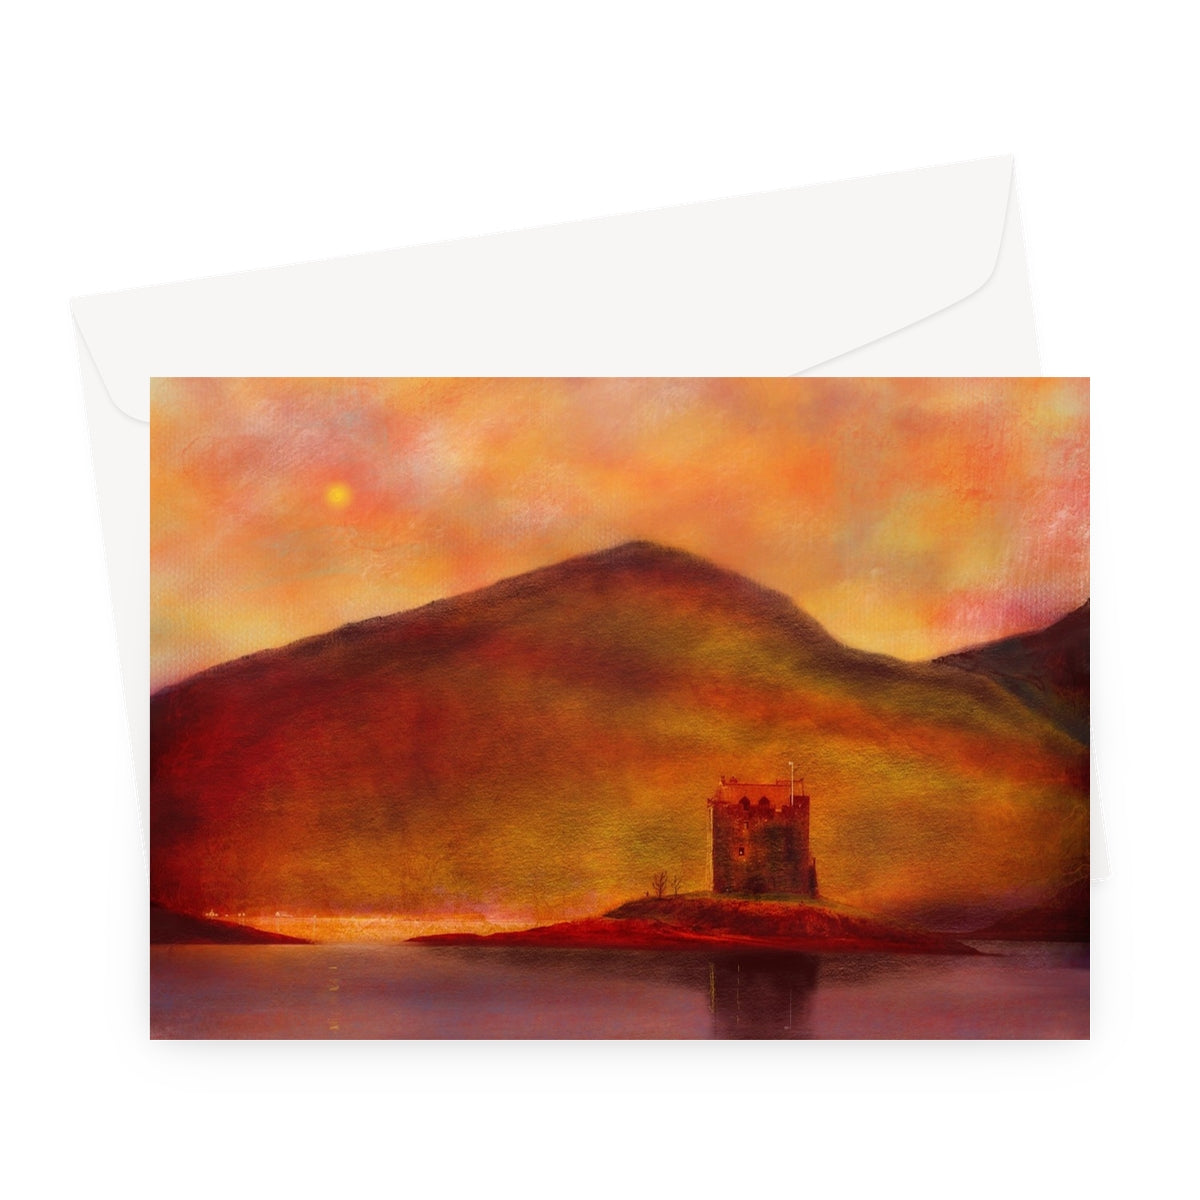 Castle Stalker Sunset Art Gifts Greeting Card-Greetings Cards-Historic & Iconic Scotland Art Gallery-A5 Landscape-1 Card-Paintings, Prints, Homeware, Art Gifts From Scotland By Scottish Artist Kevin Hunter